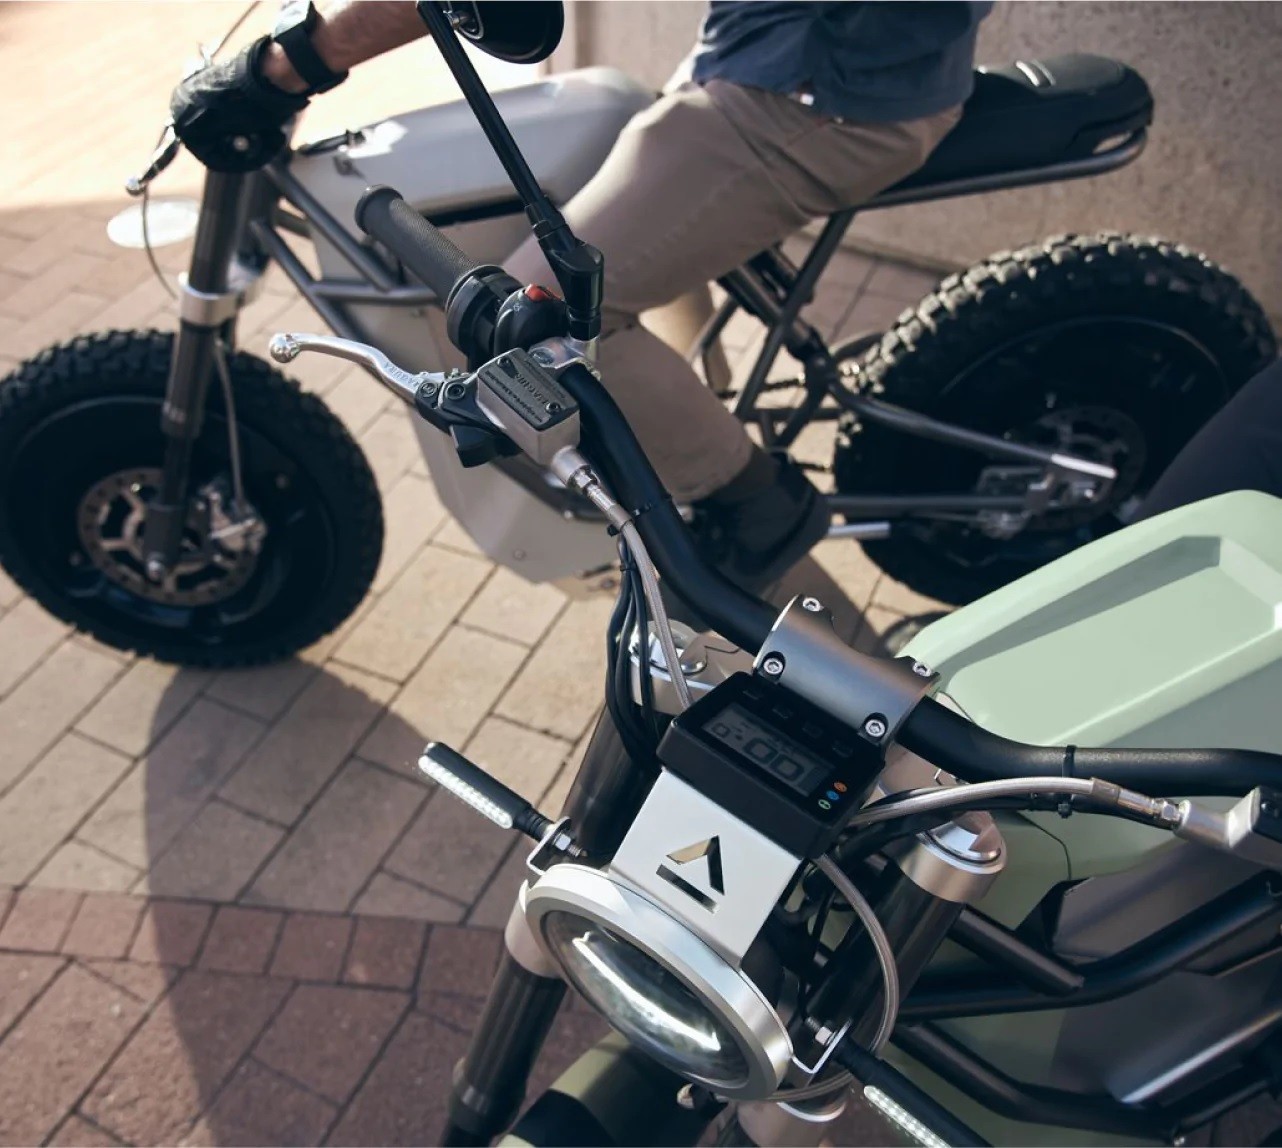 land moto s district scrambler is an off road ready e motorcycle capable of over 70 mph 2